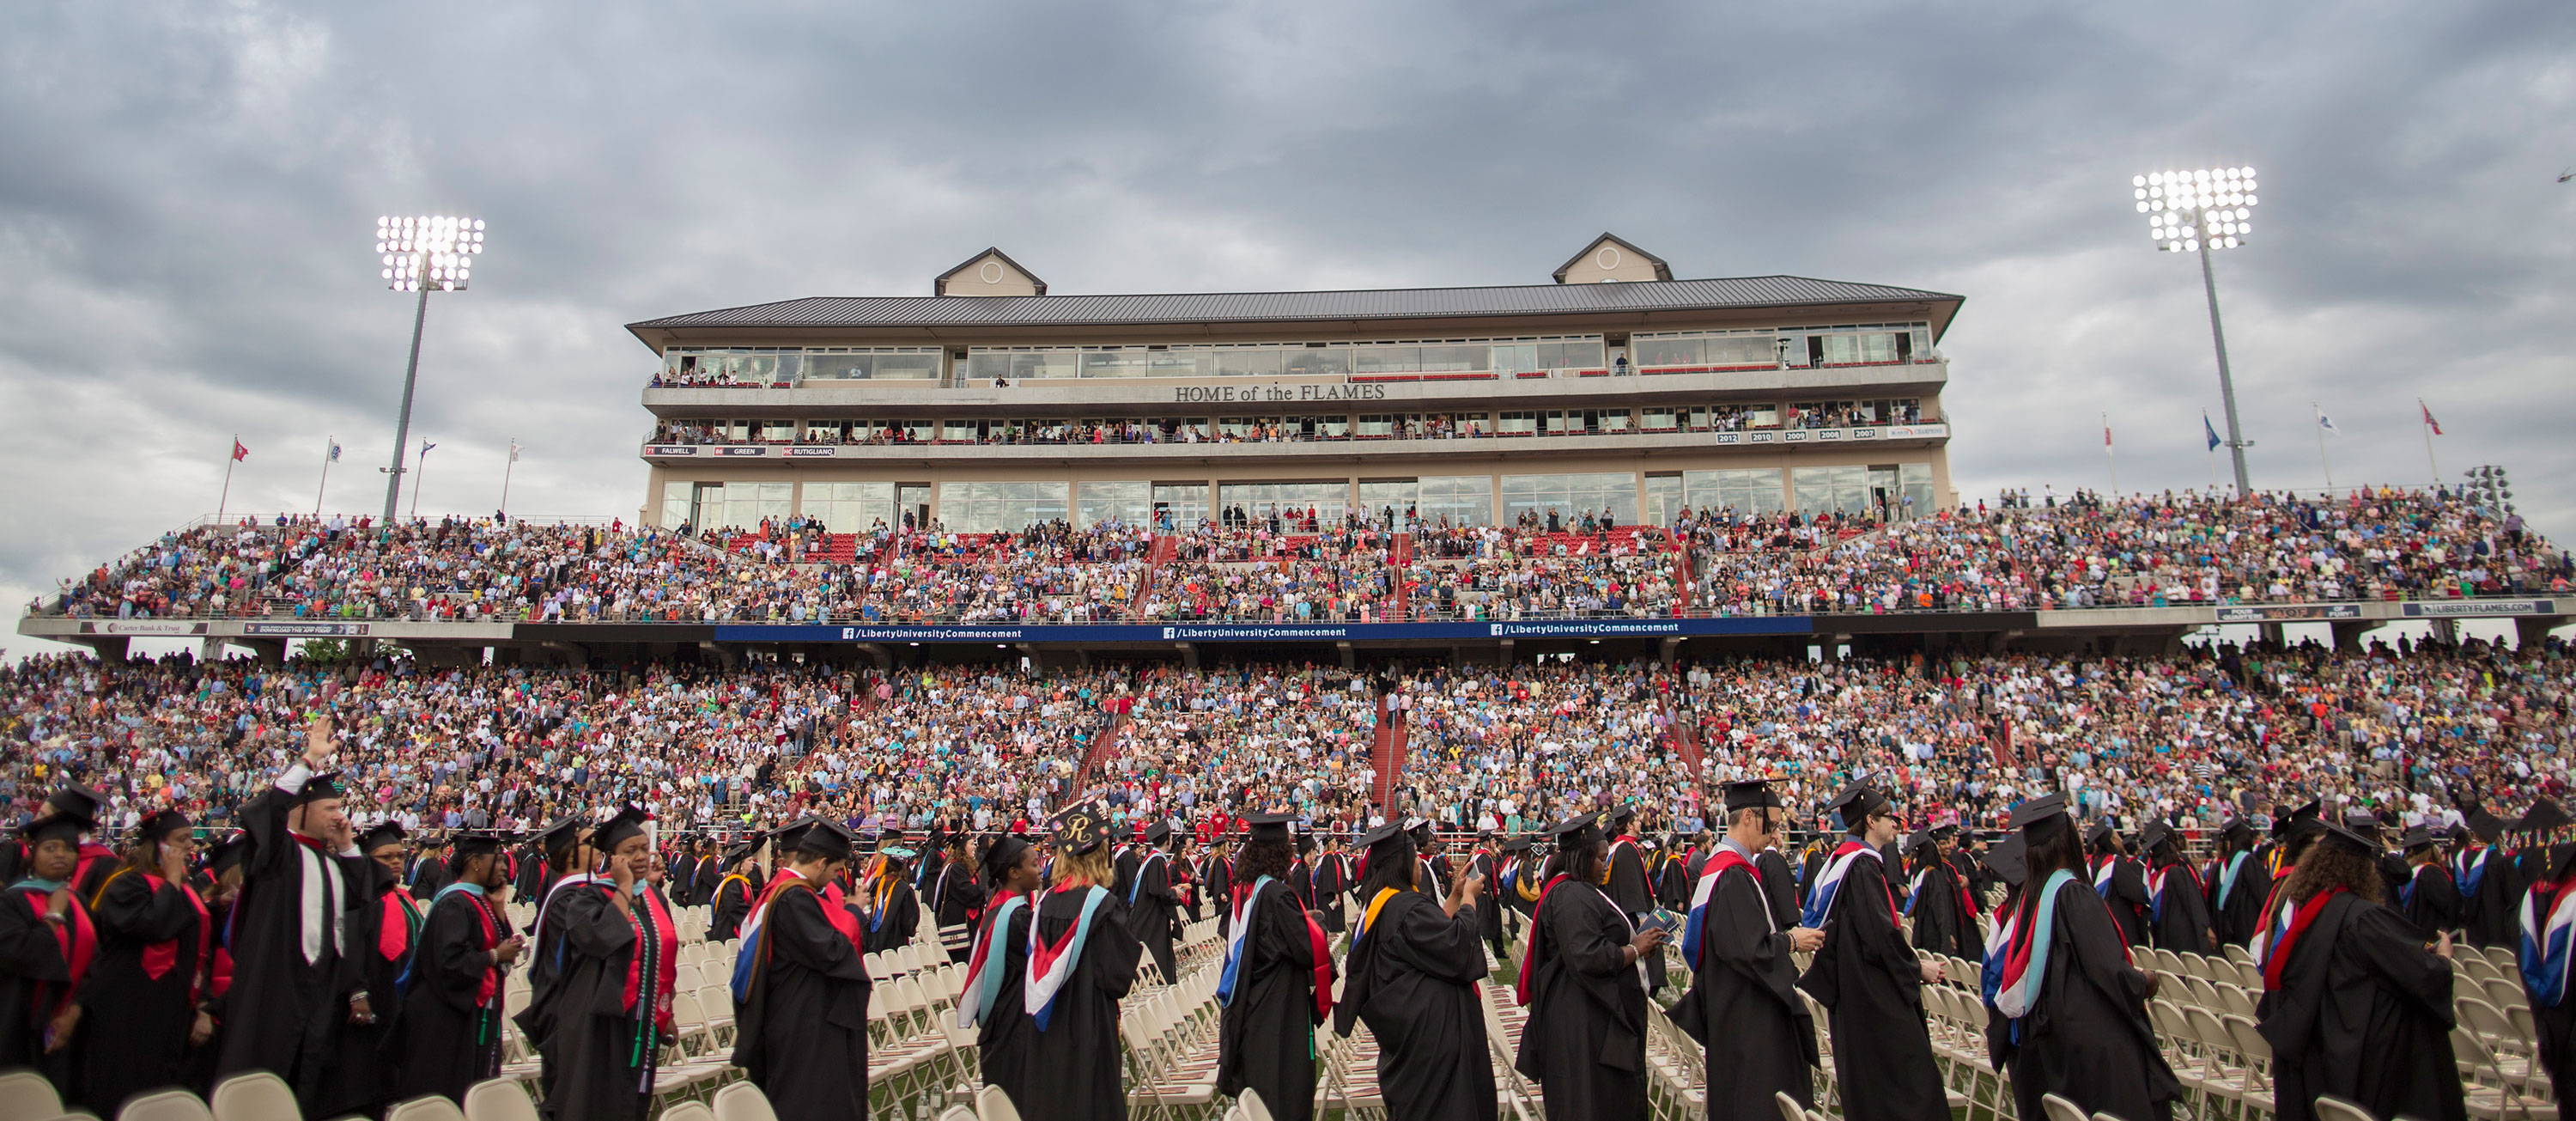 Graduates line up for Liberty's 41st Commencement ceremony.